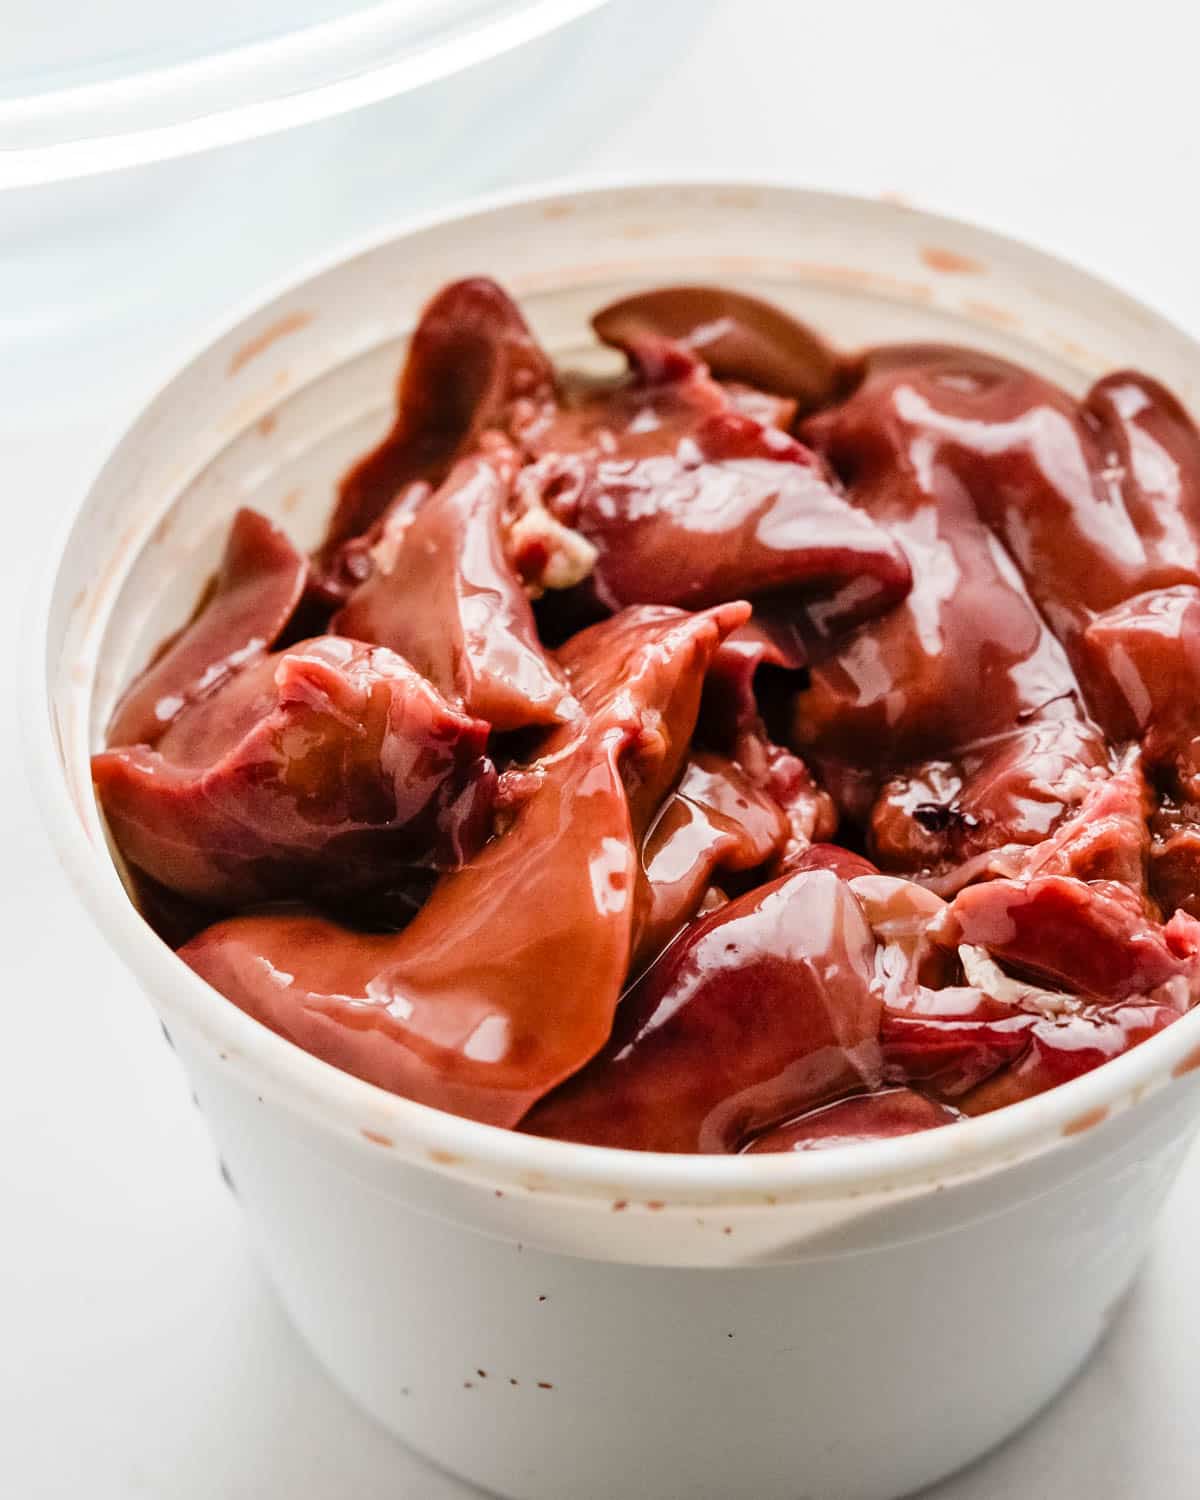 A container of chicken livers.